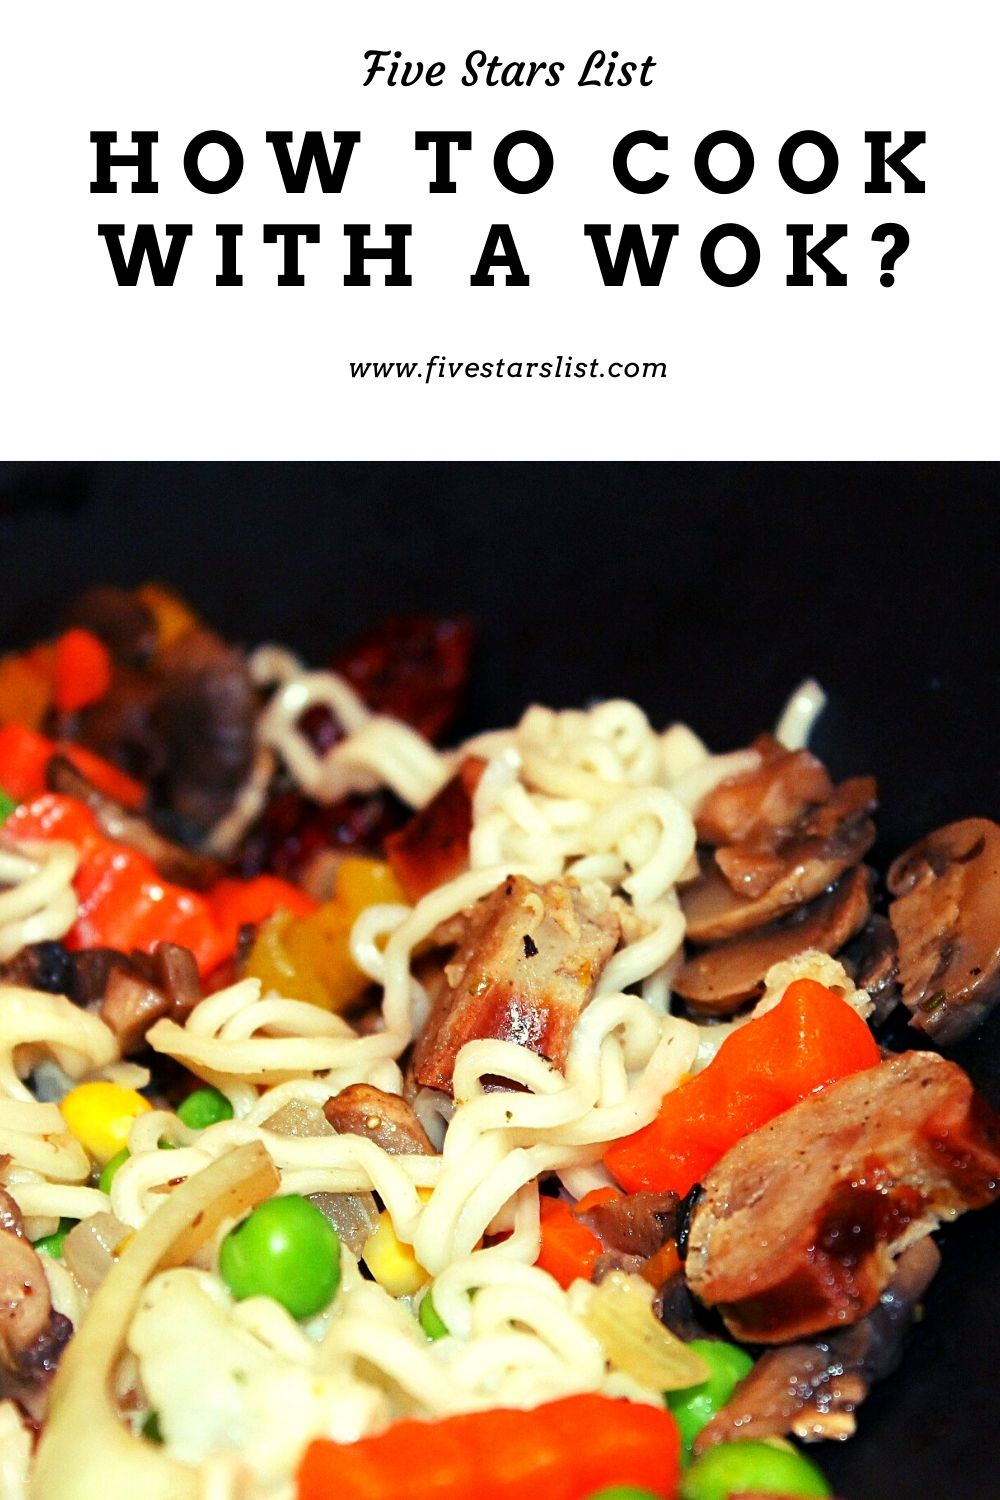 How to Cook with a Wok?